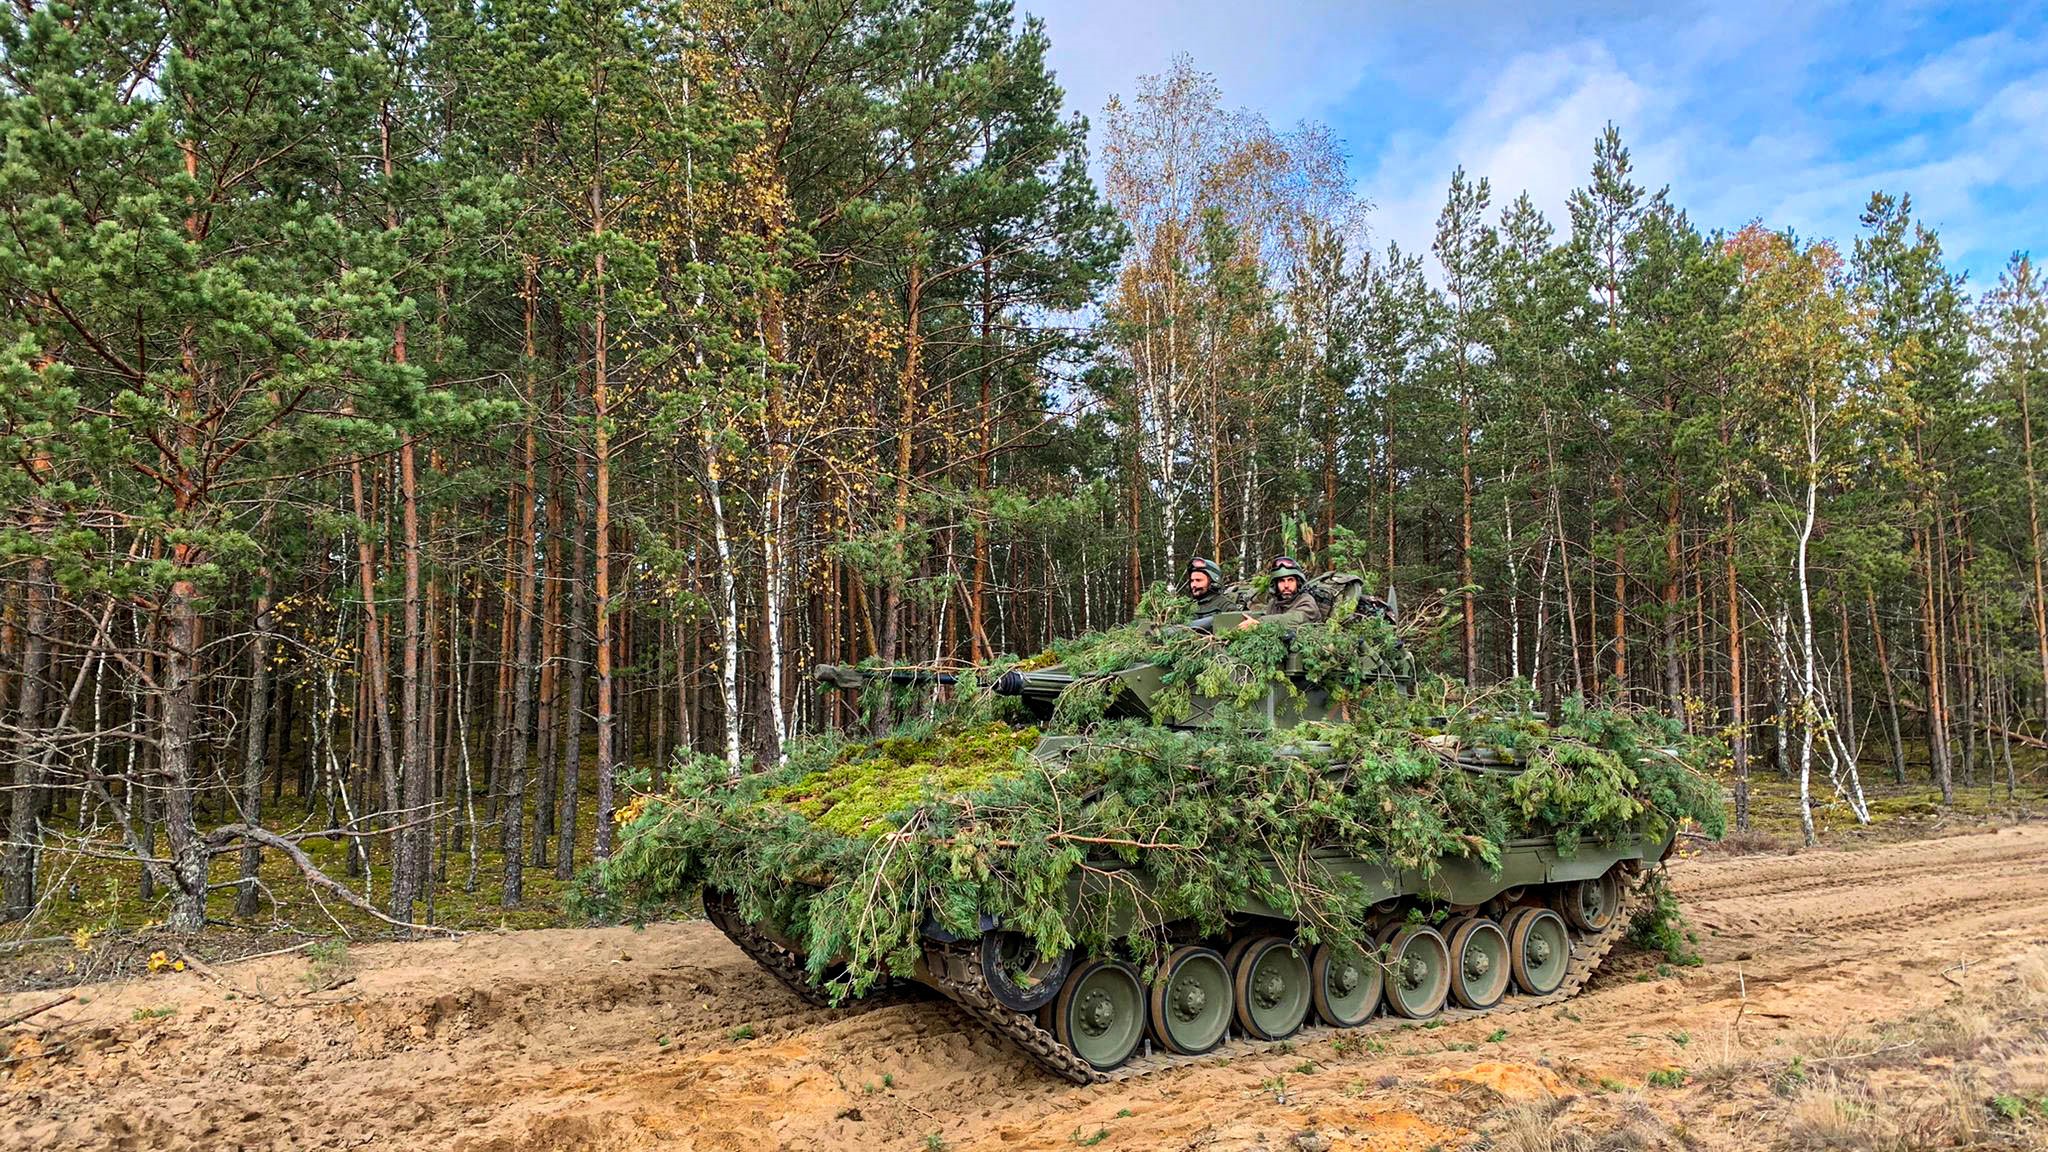 Infantry Fighting Vehicle (IFV) camouflaged with branches.